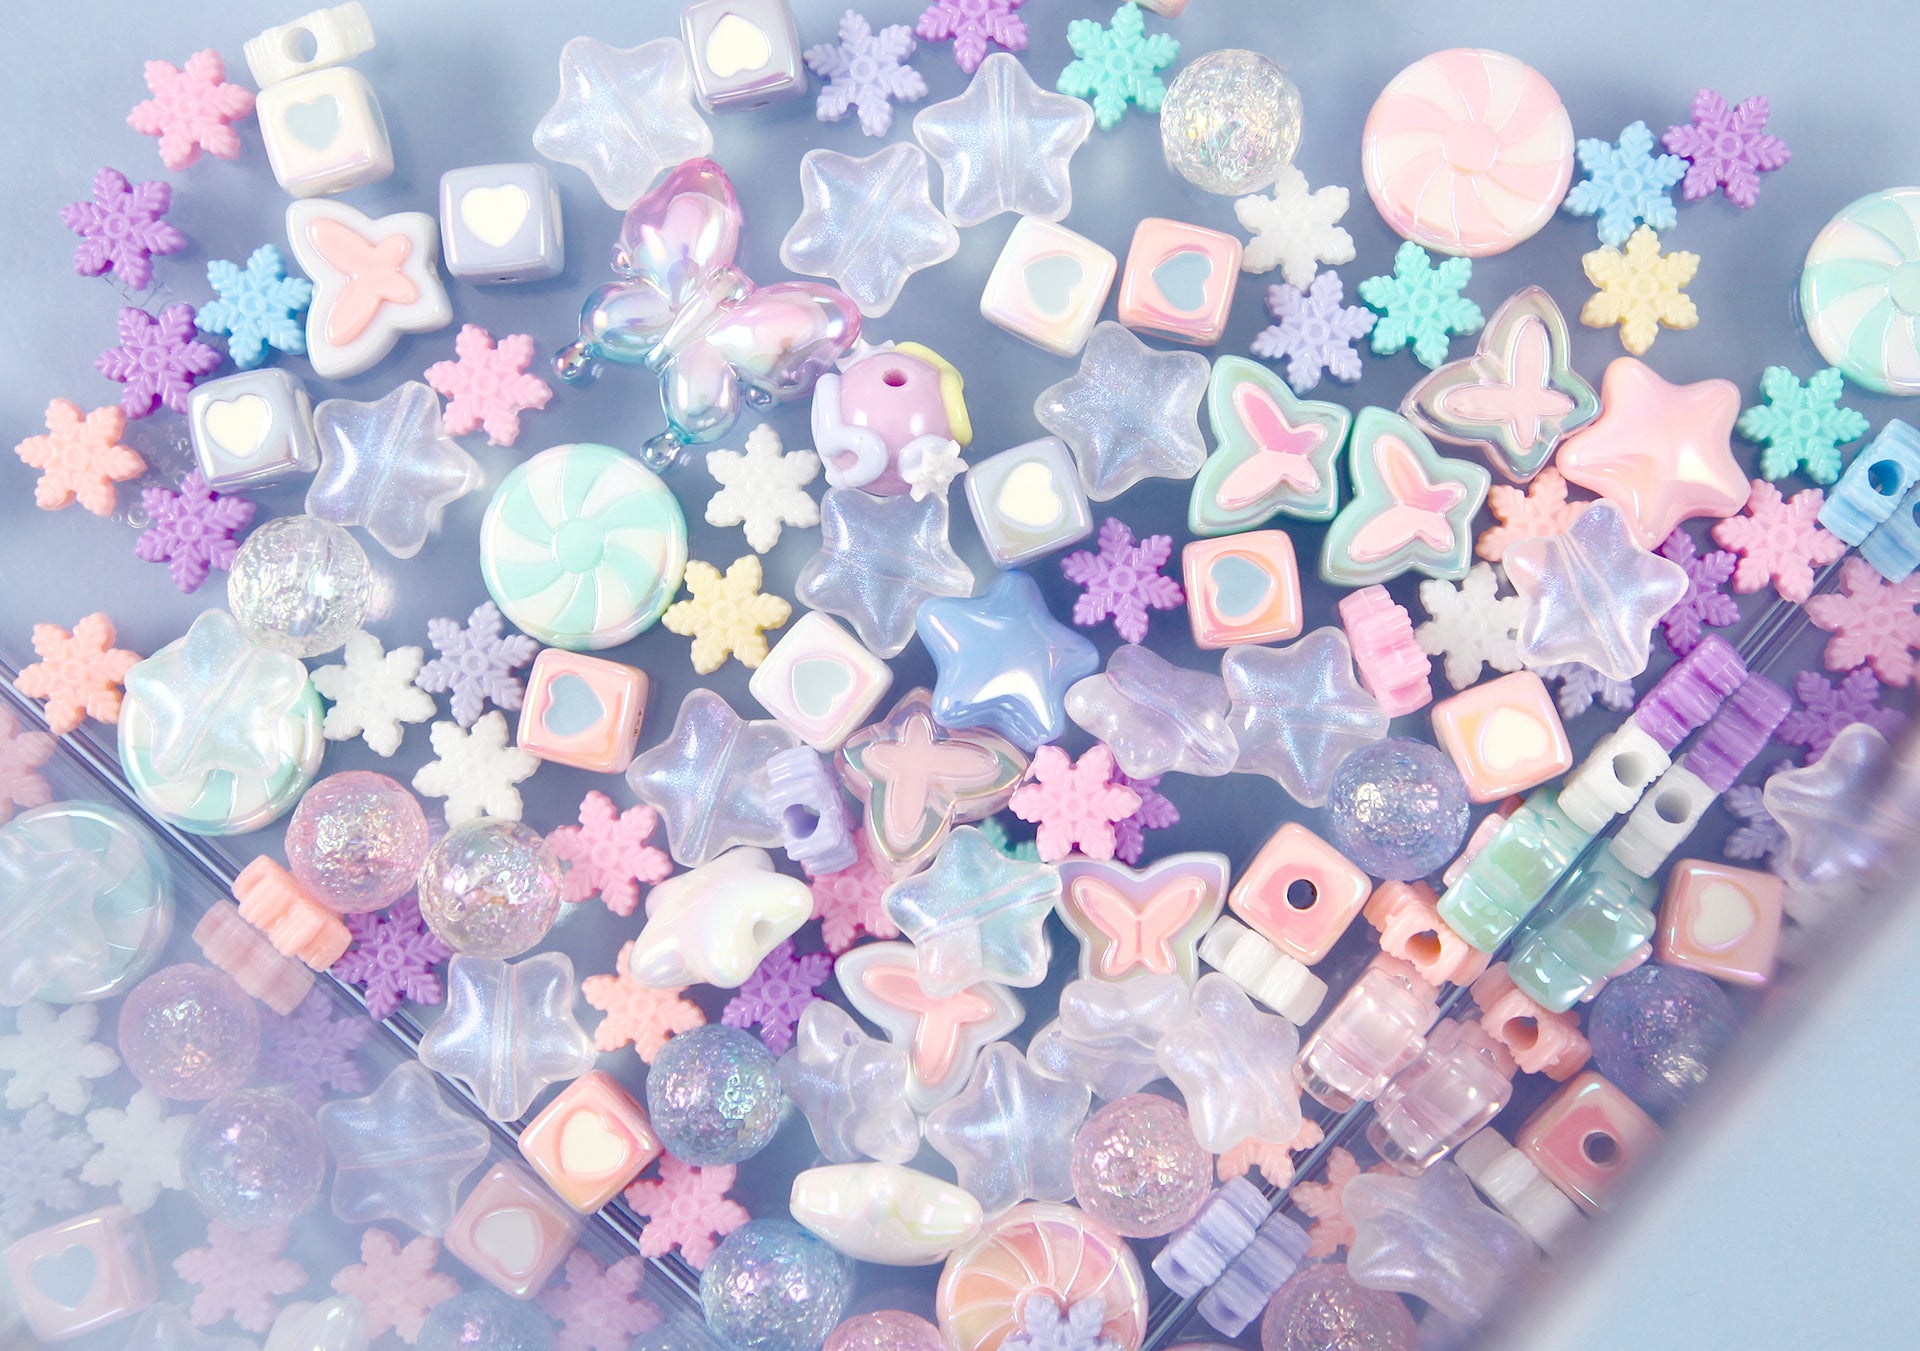 100 Mixed Pastel Color Acrylic Star Beads Charms 14mm Jewelry